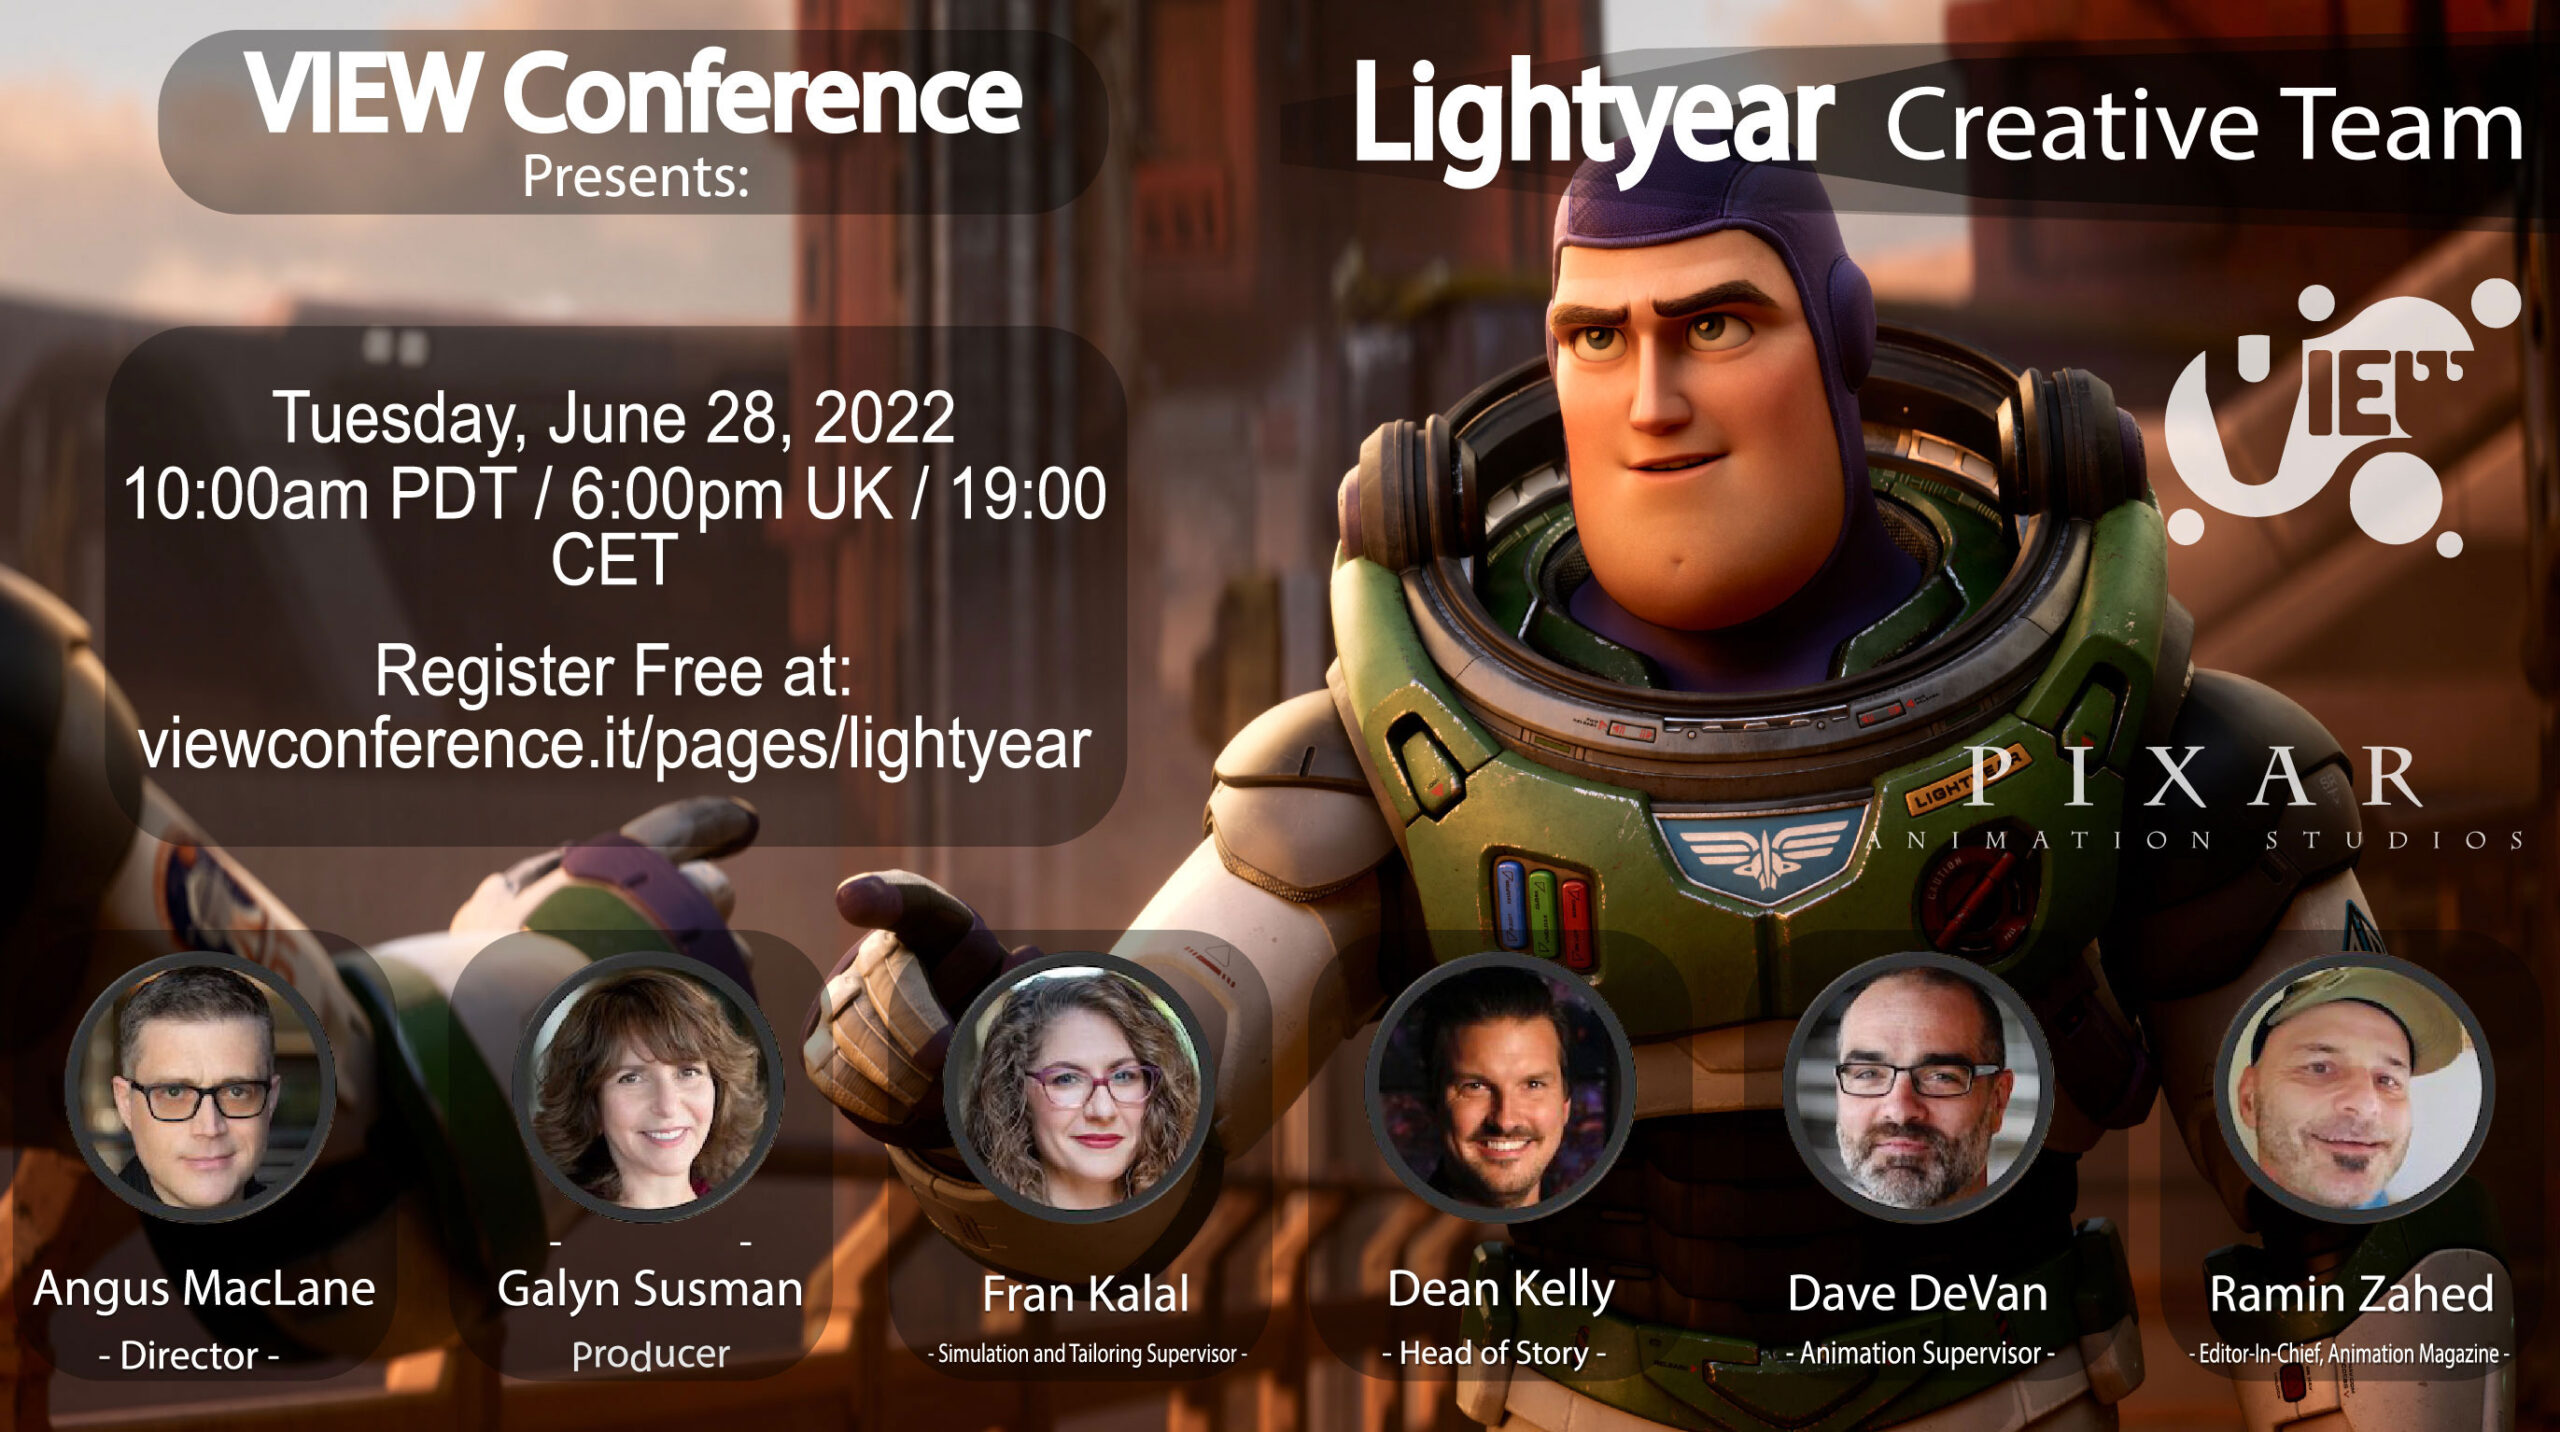 “Lightyear” – VIEW Conference and Pixar Present a FREE Online Panel with the Director and Creators of Pixar’s New Animated Feature